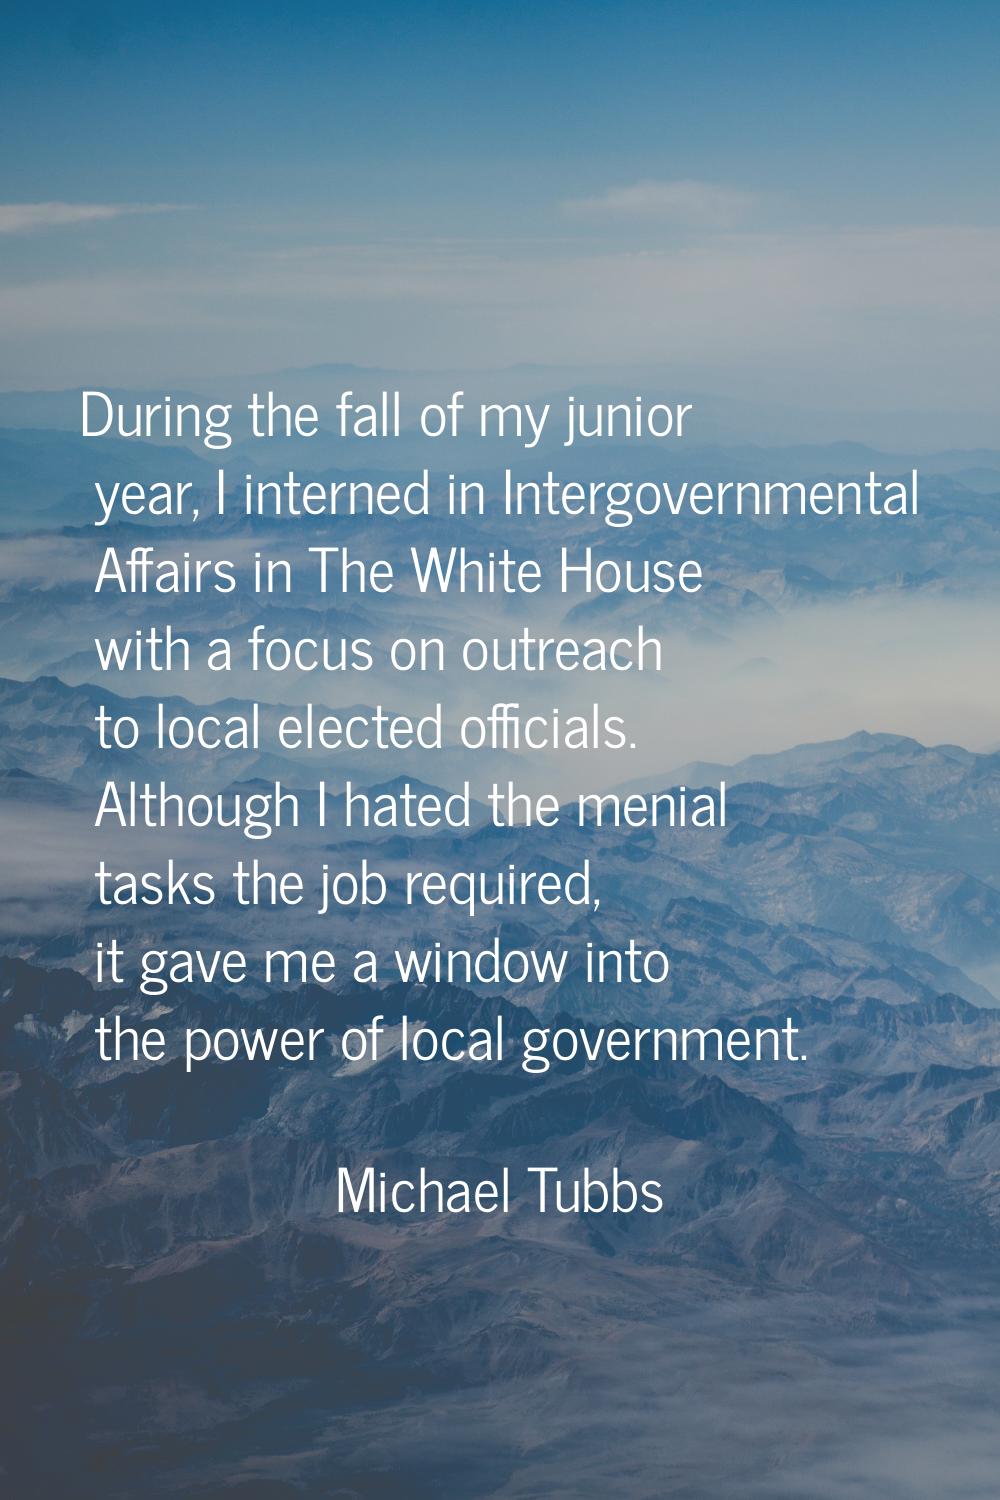 During the fall of my junior year, I interned in Intergovernmental Affairs in The White House with 